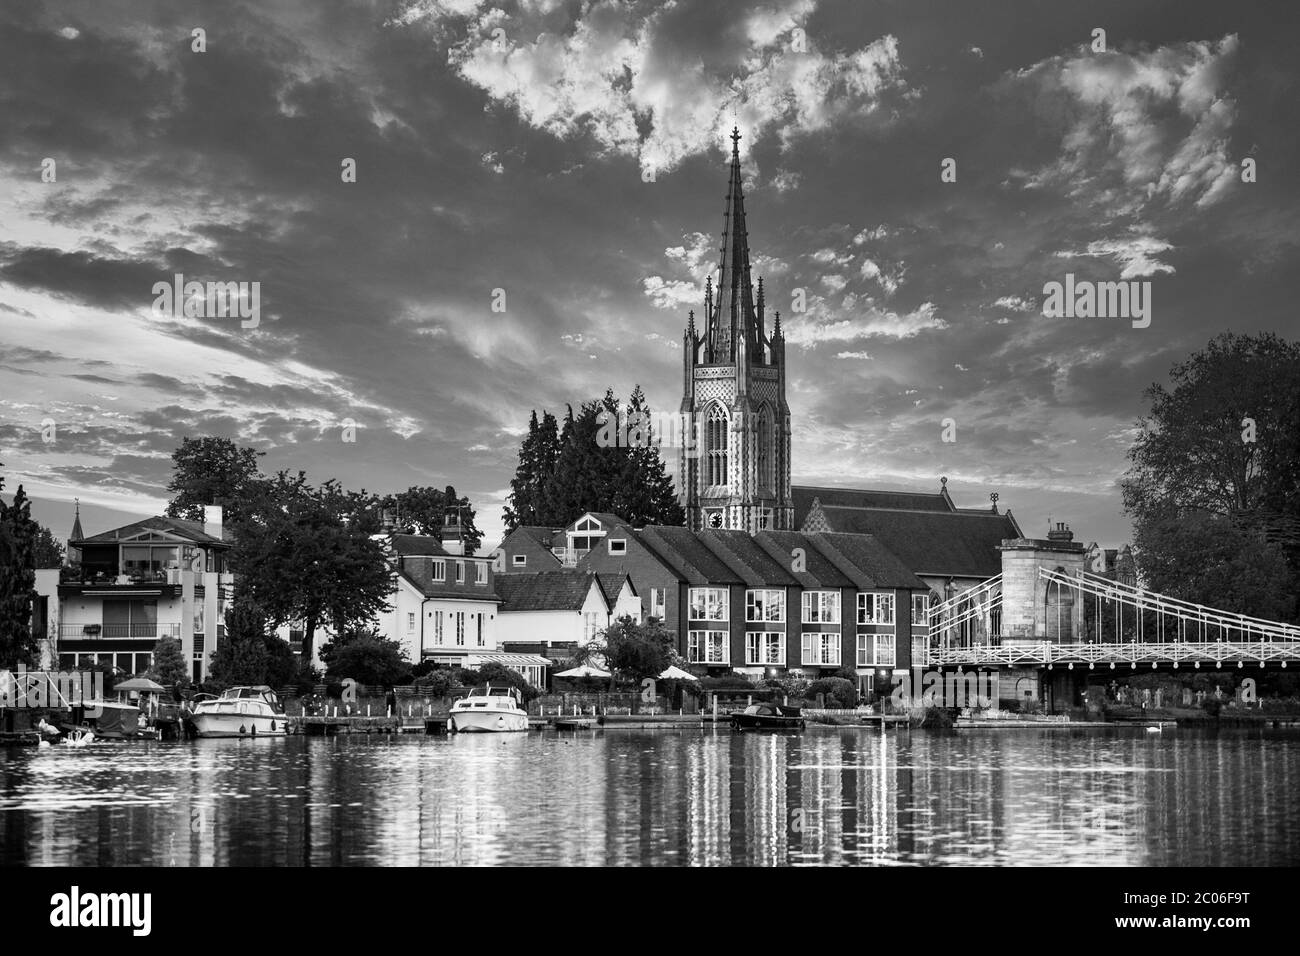 Marlow bridge and church in black and white Stock Photo